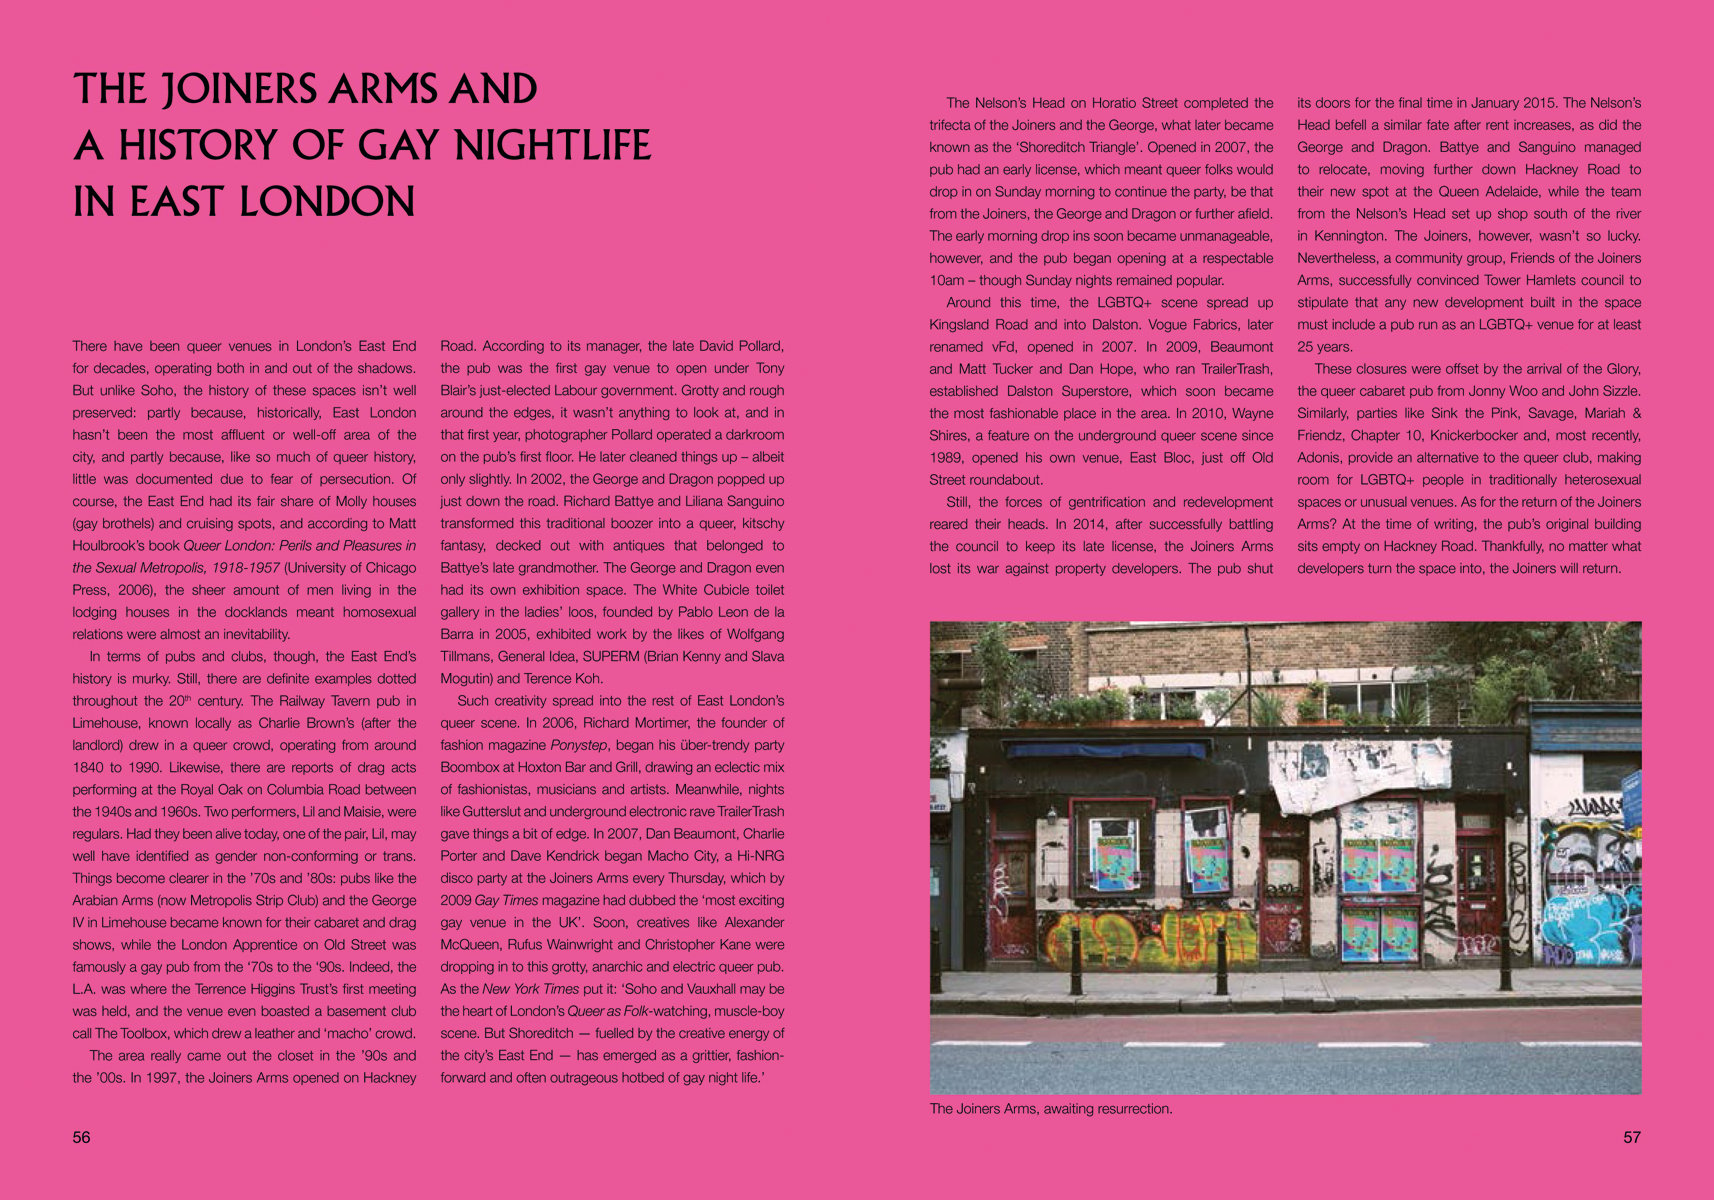 LGBT rainbow flag painted to top edge of brick building, on pink cover of 'QUEER LONDON', by ACC Art Books.